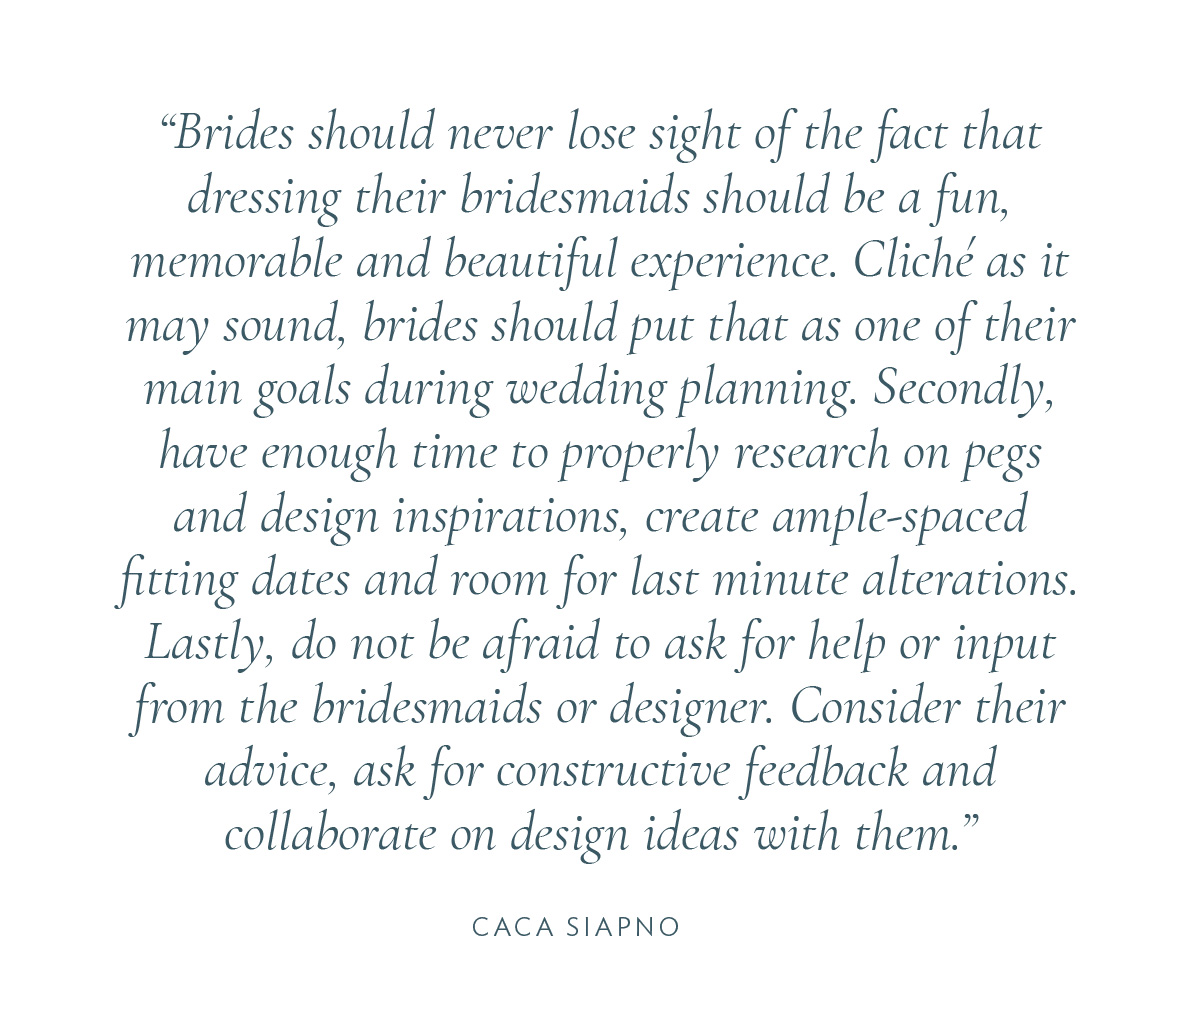 Brides should never lose sight of the fact that dressing their bridesmaids should be a fun, memorable, and beautiful experience. Cliche as it may sound, brides should put that as one of their main goals during wedding planning. Secondly, have enough time to properly research on pegs and design inspirations, create ample-spaced fitting dates and room for last minute alternations. Lastly, do not be afraid to ask for help or input from the bridesmaids or designer. Consider their advice, ask for constructive feedback, and collaborate on design ideas with them.